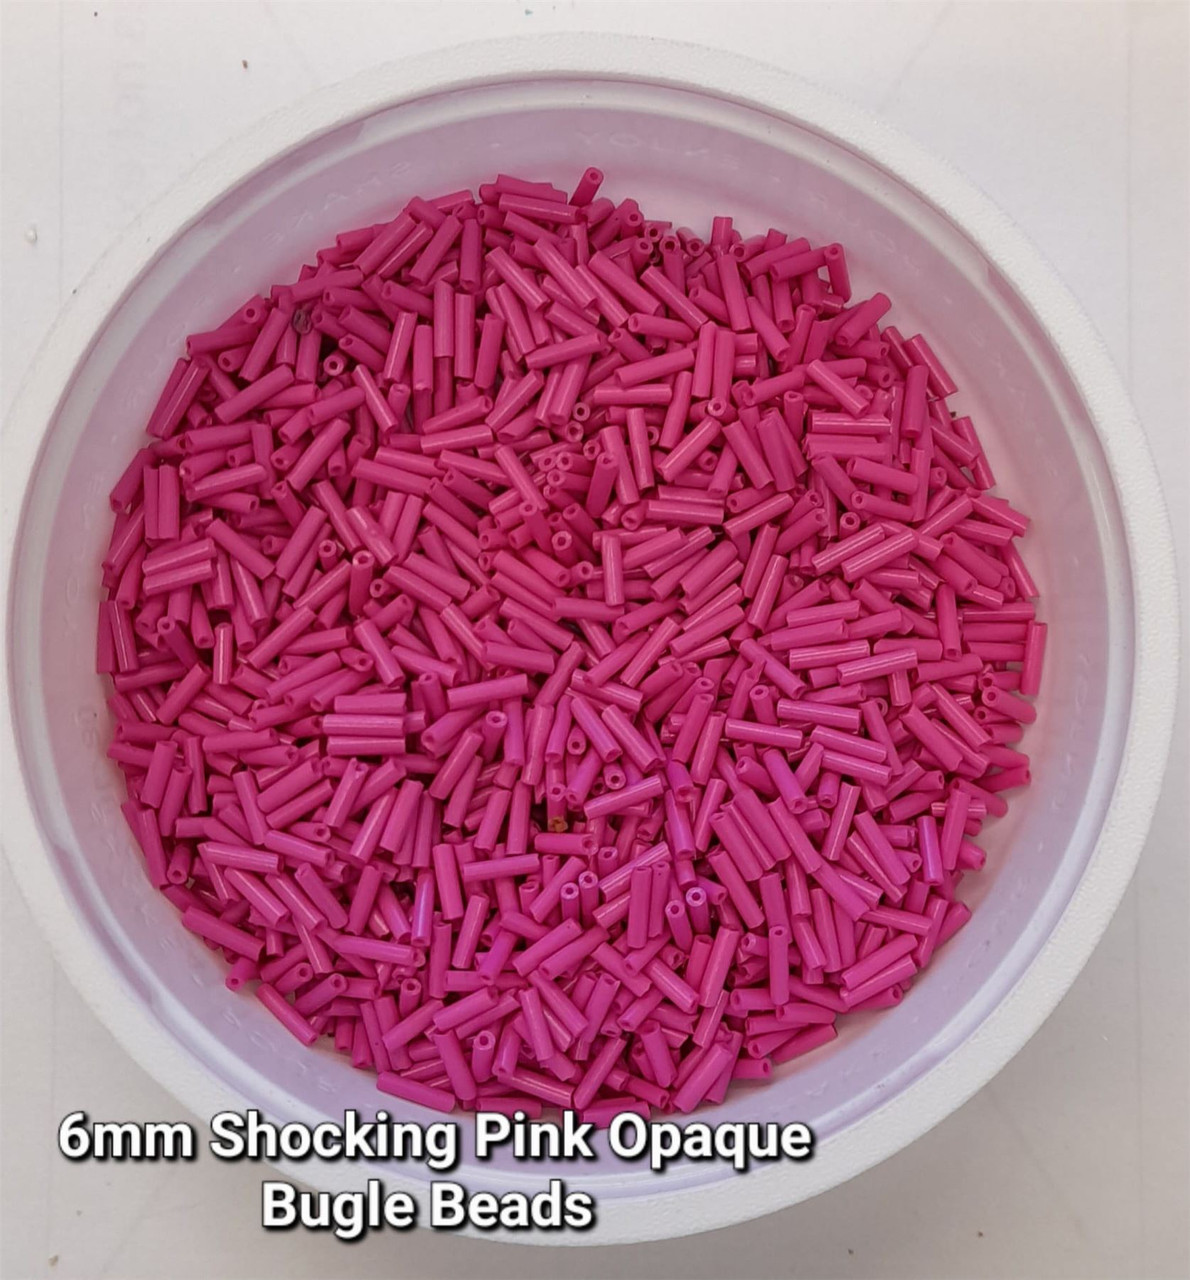 50g glass bugle beads - Shocking Pink Opaque - approx 6mm